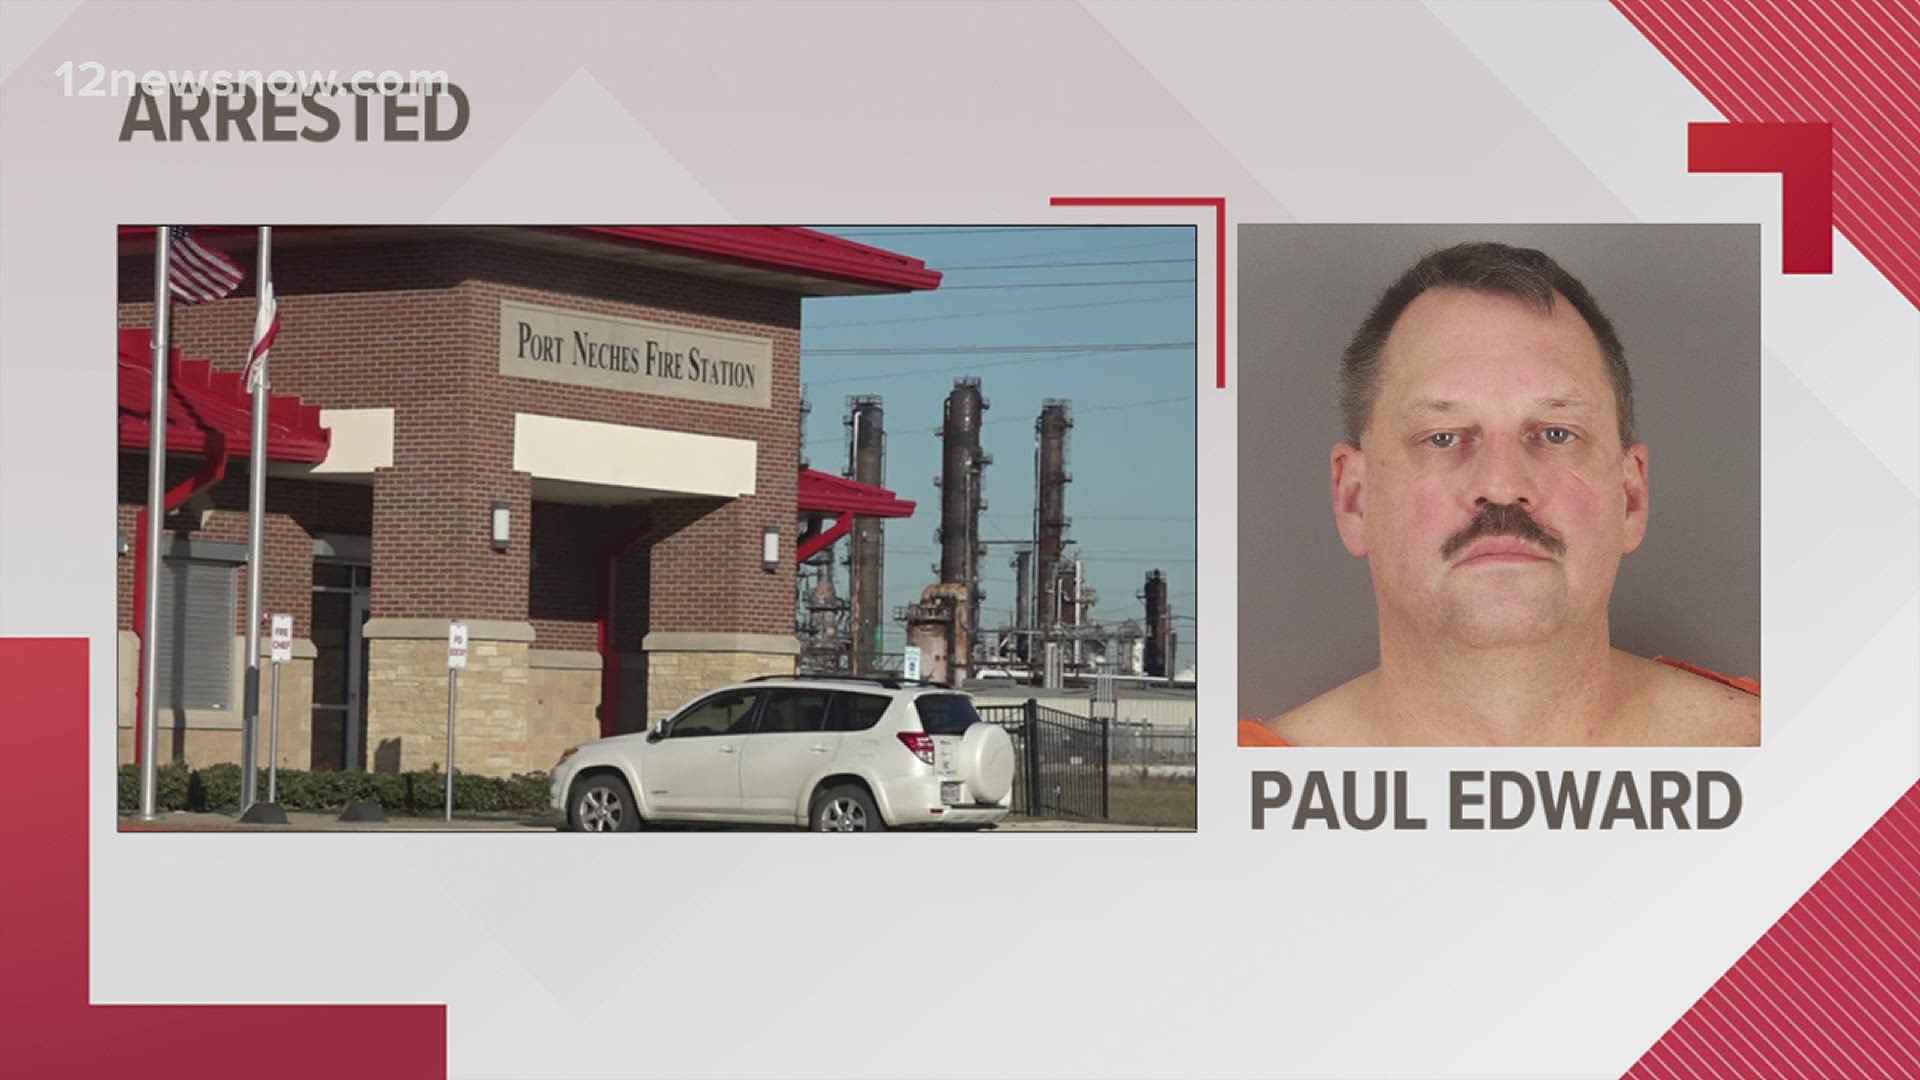 This investigation into the fire chief started with a tip to the National Center for Missing and Exploited Children. Full story on 12Newsnow.com.